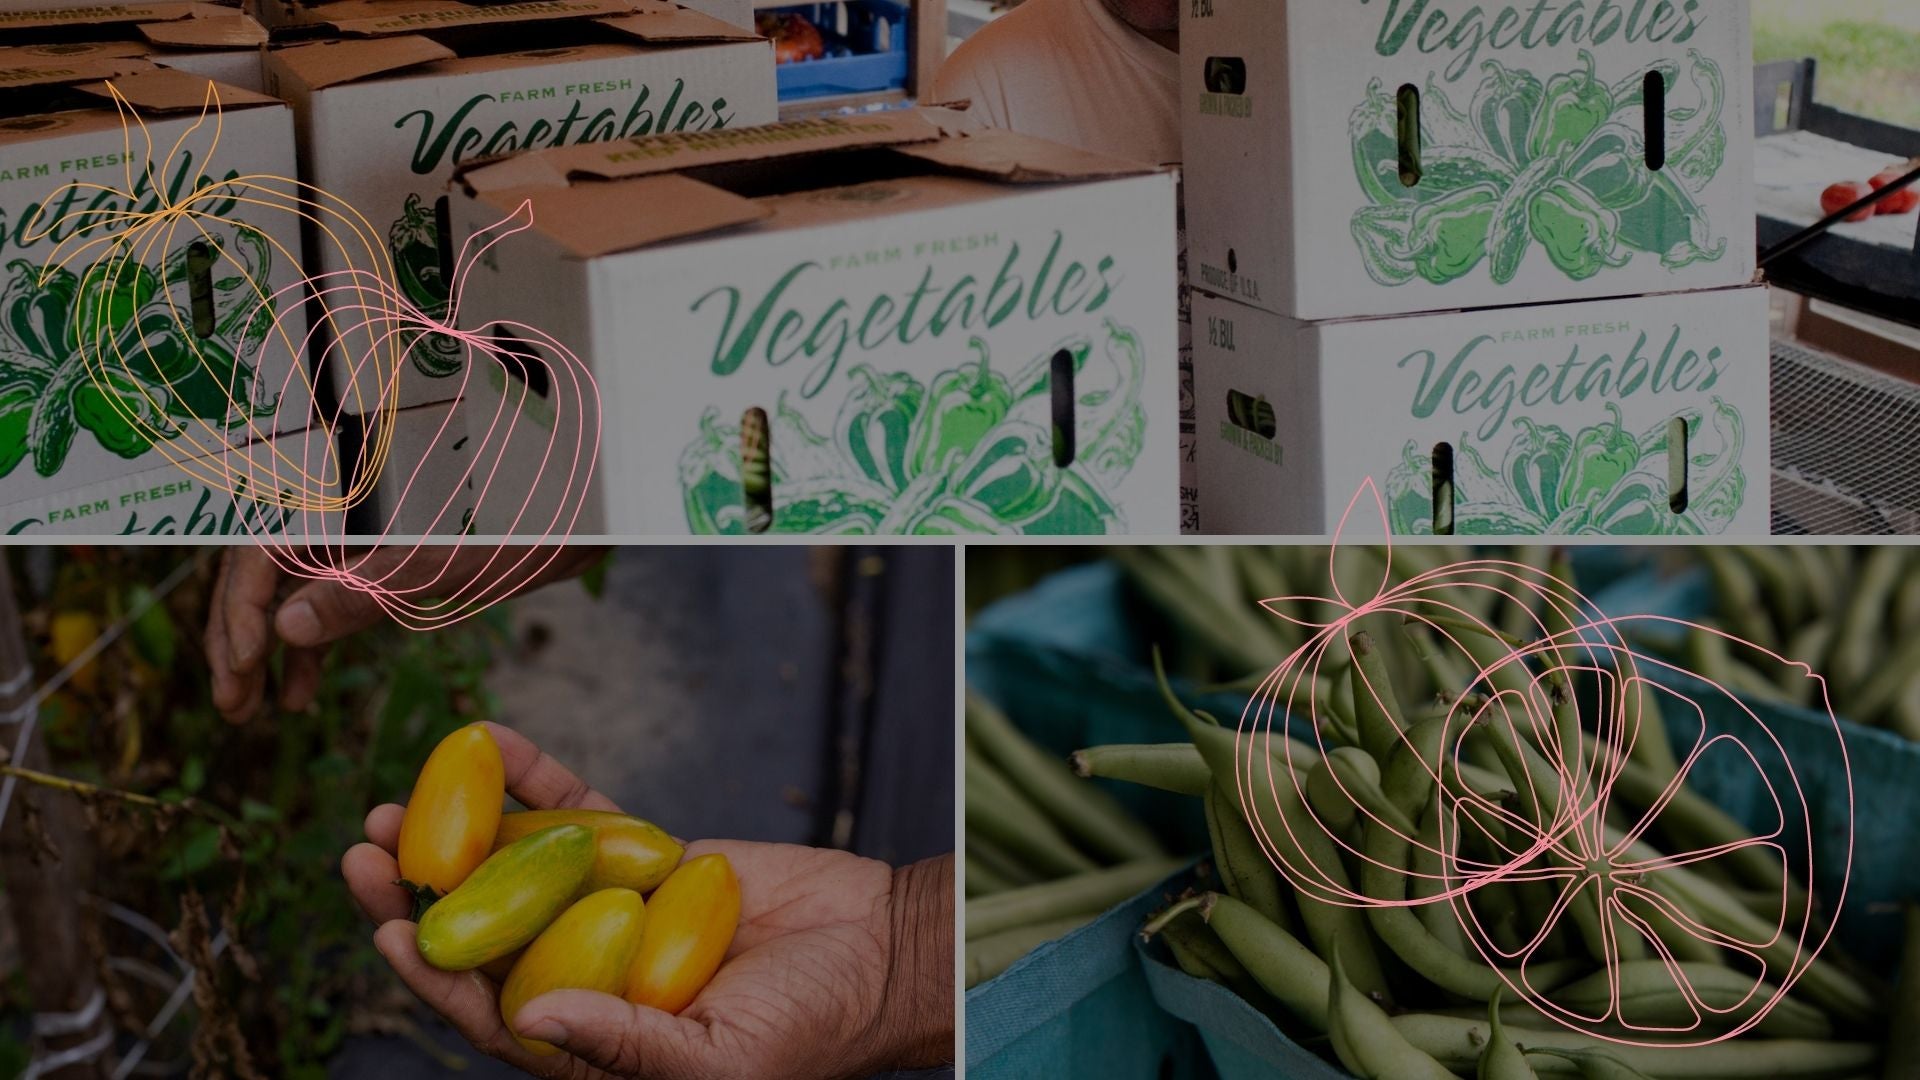 Boxes of fresh fruits and vegetables were distributed and local food systems got a boost from a student-led "Connector"